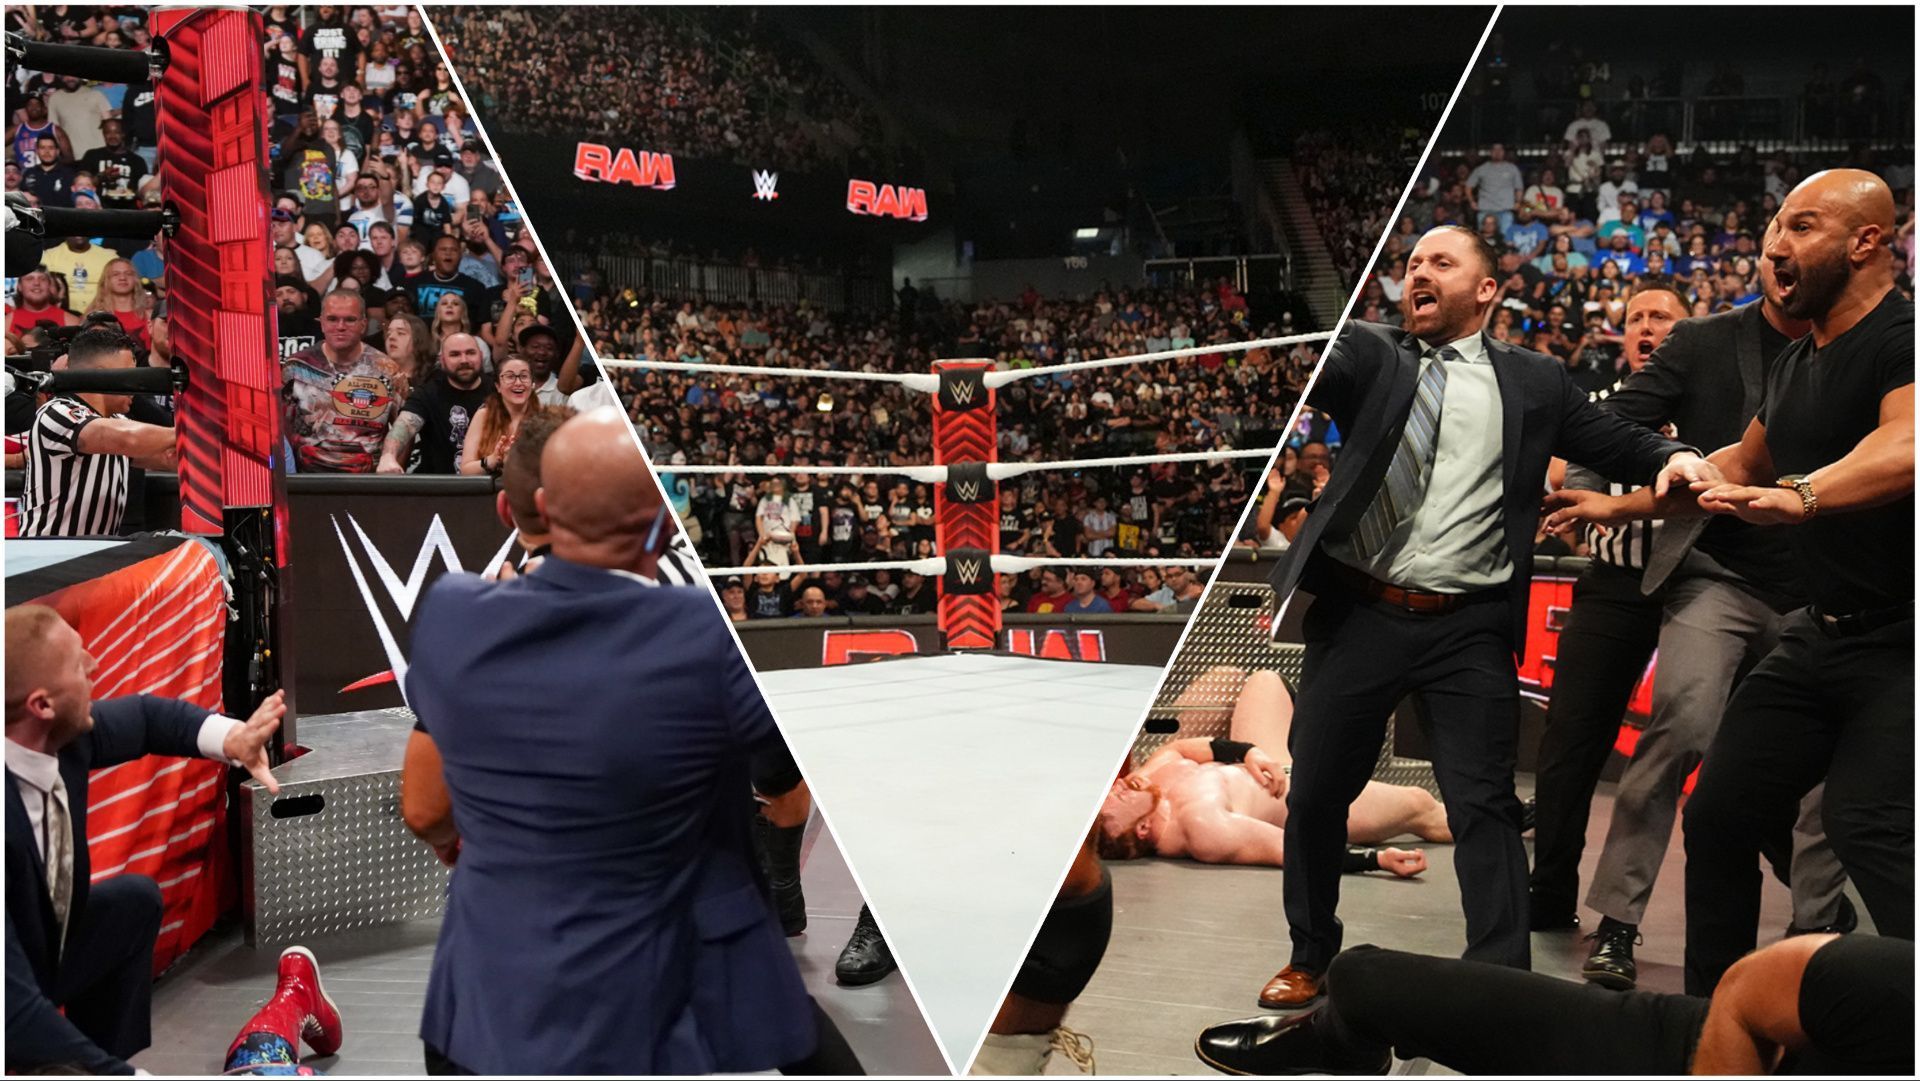 WWE Producers try to restore order on RAW